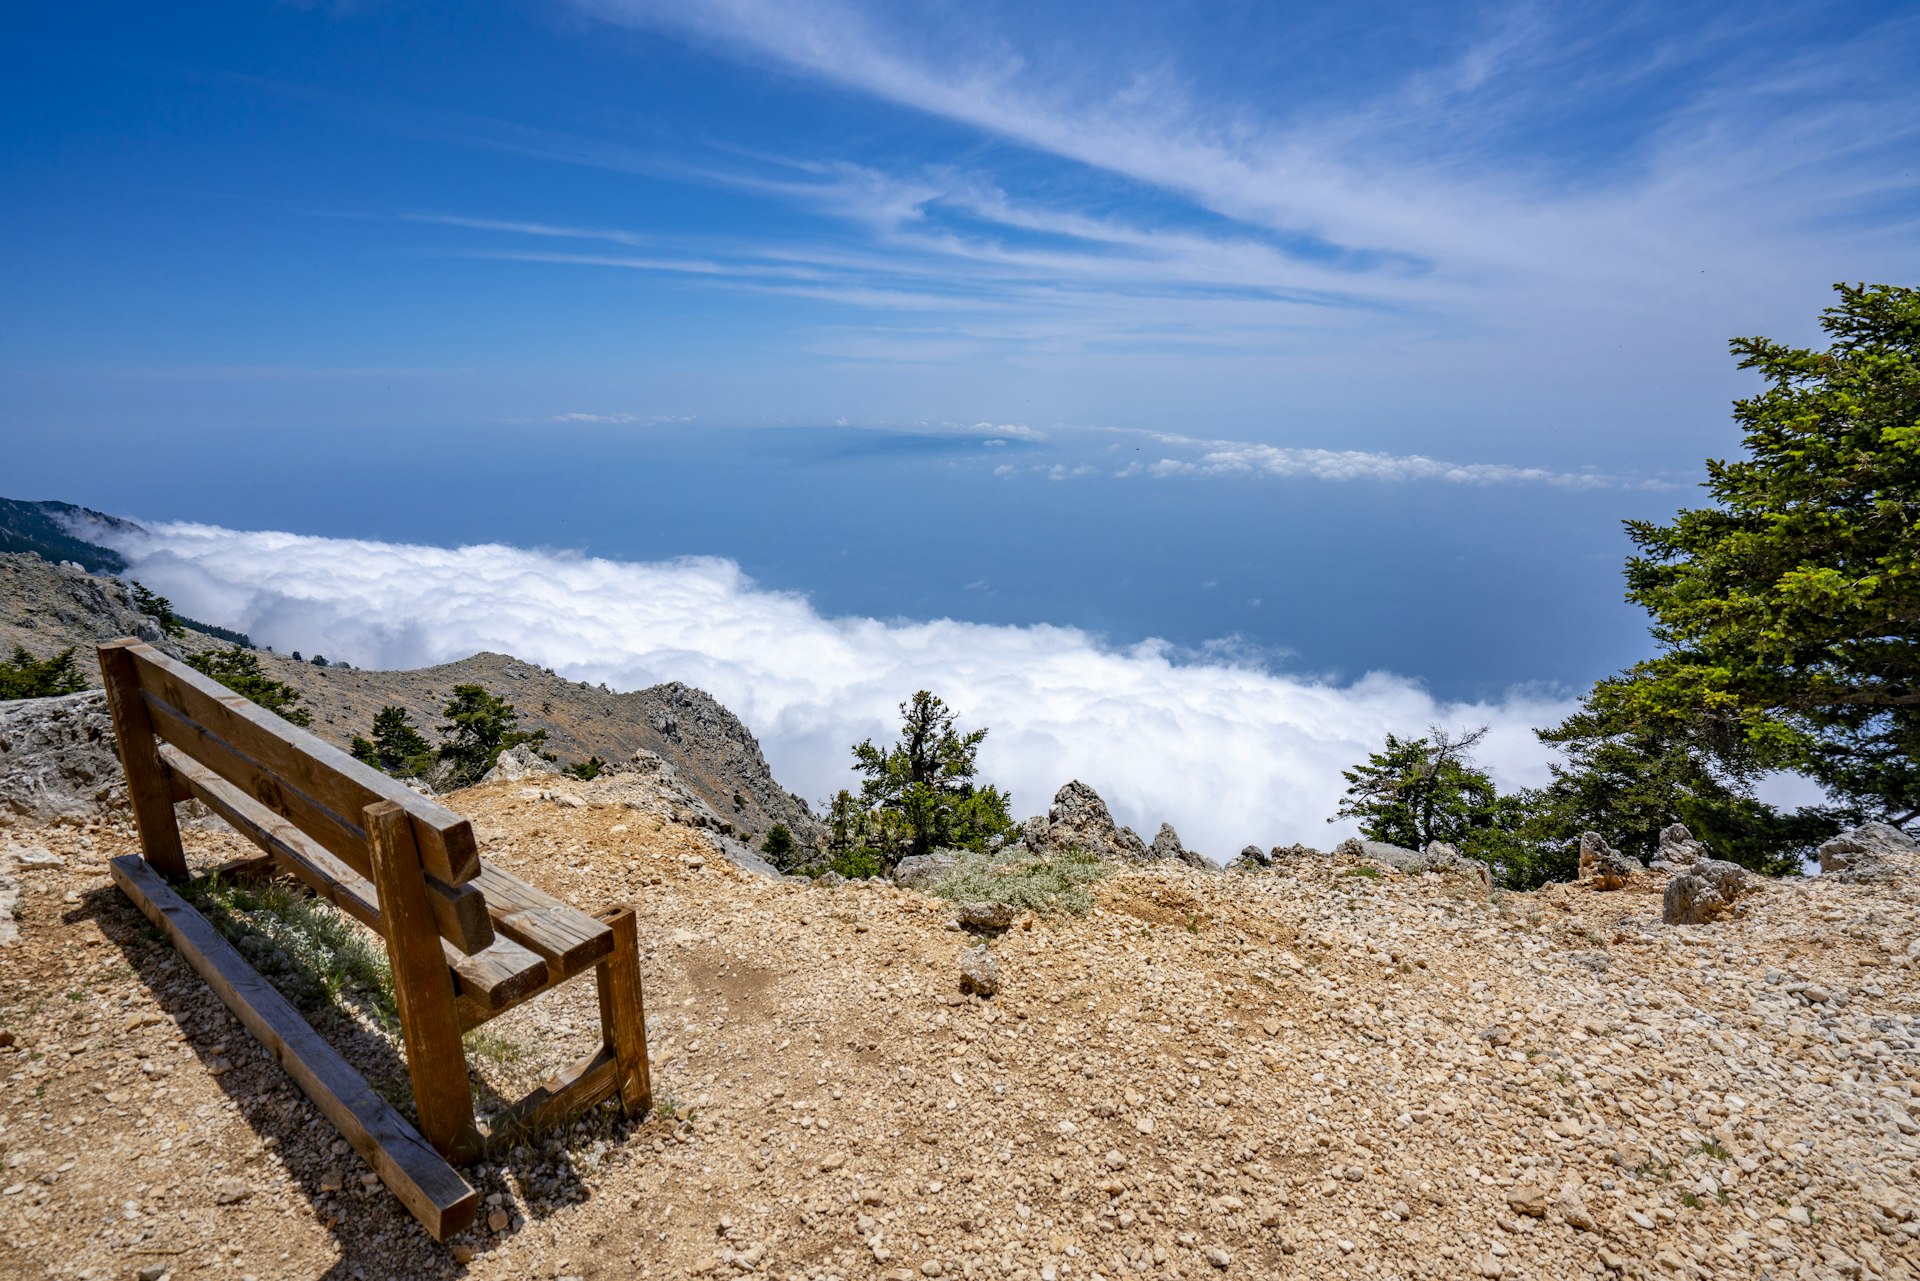 A wooden bench on the summit of Mount Ainos, Kefalonia. The view looks down over the island, which is shrouded in cloud. The mountain top is above the cloud line.